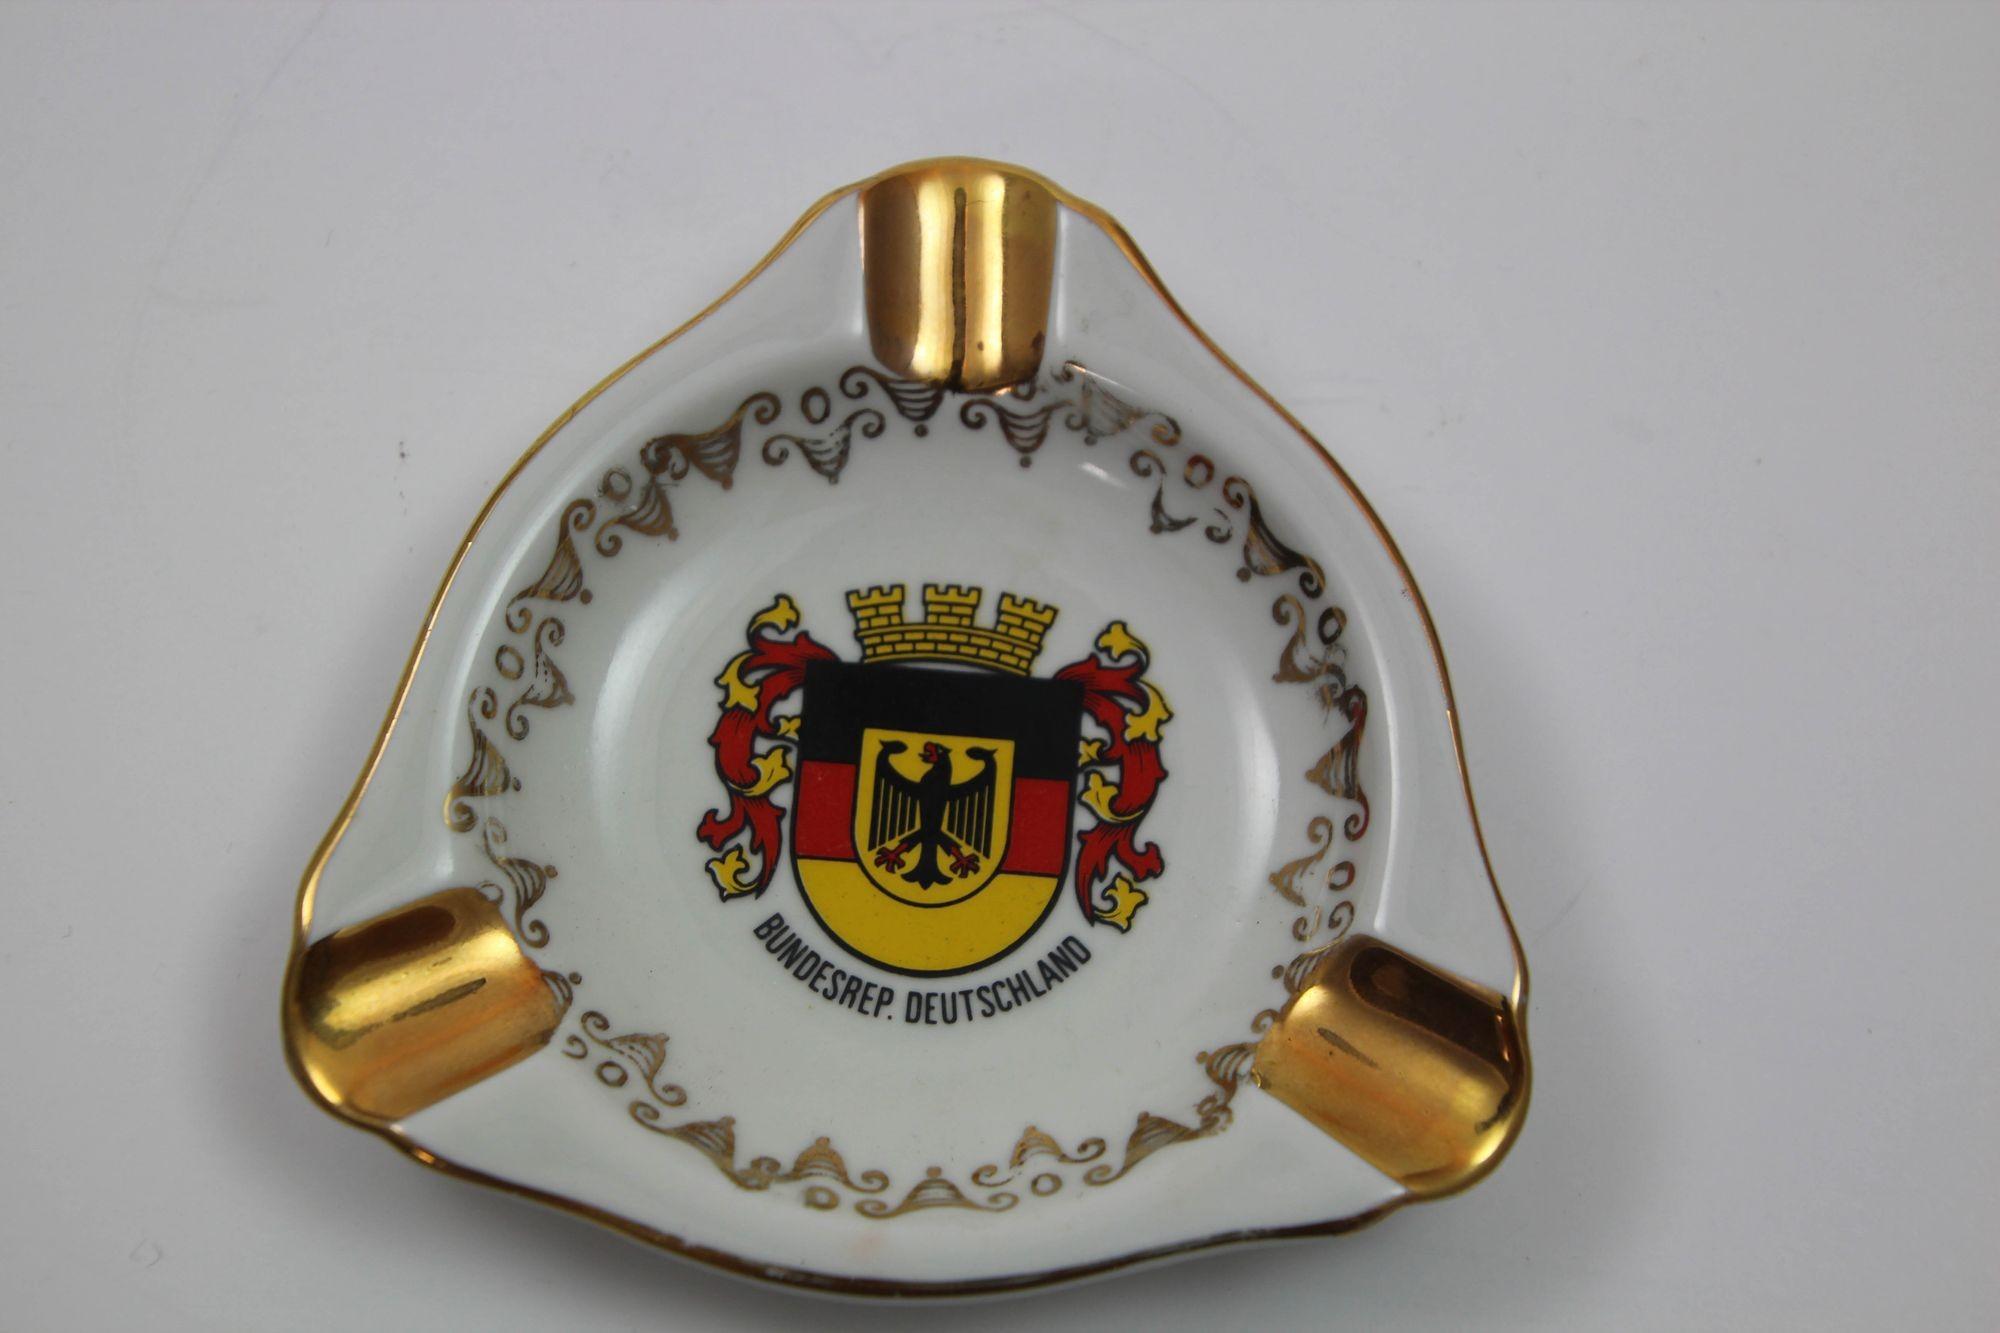 Vintage Made in Germany Souvenir Ashtray.
Federal Republic of Germany. 